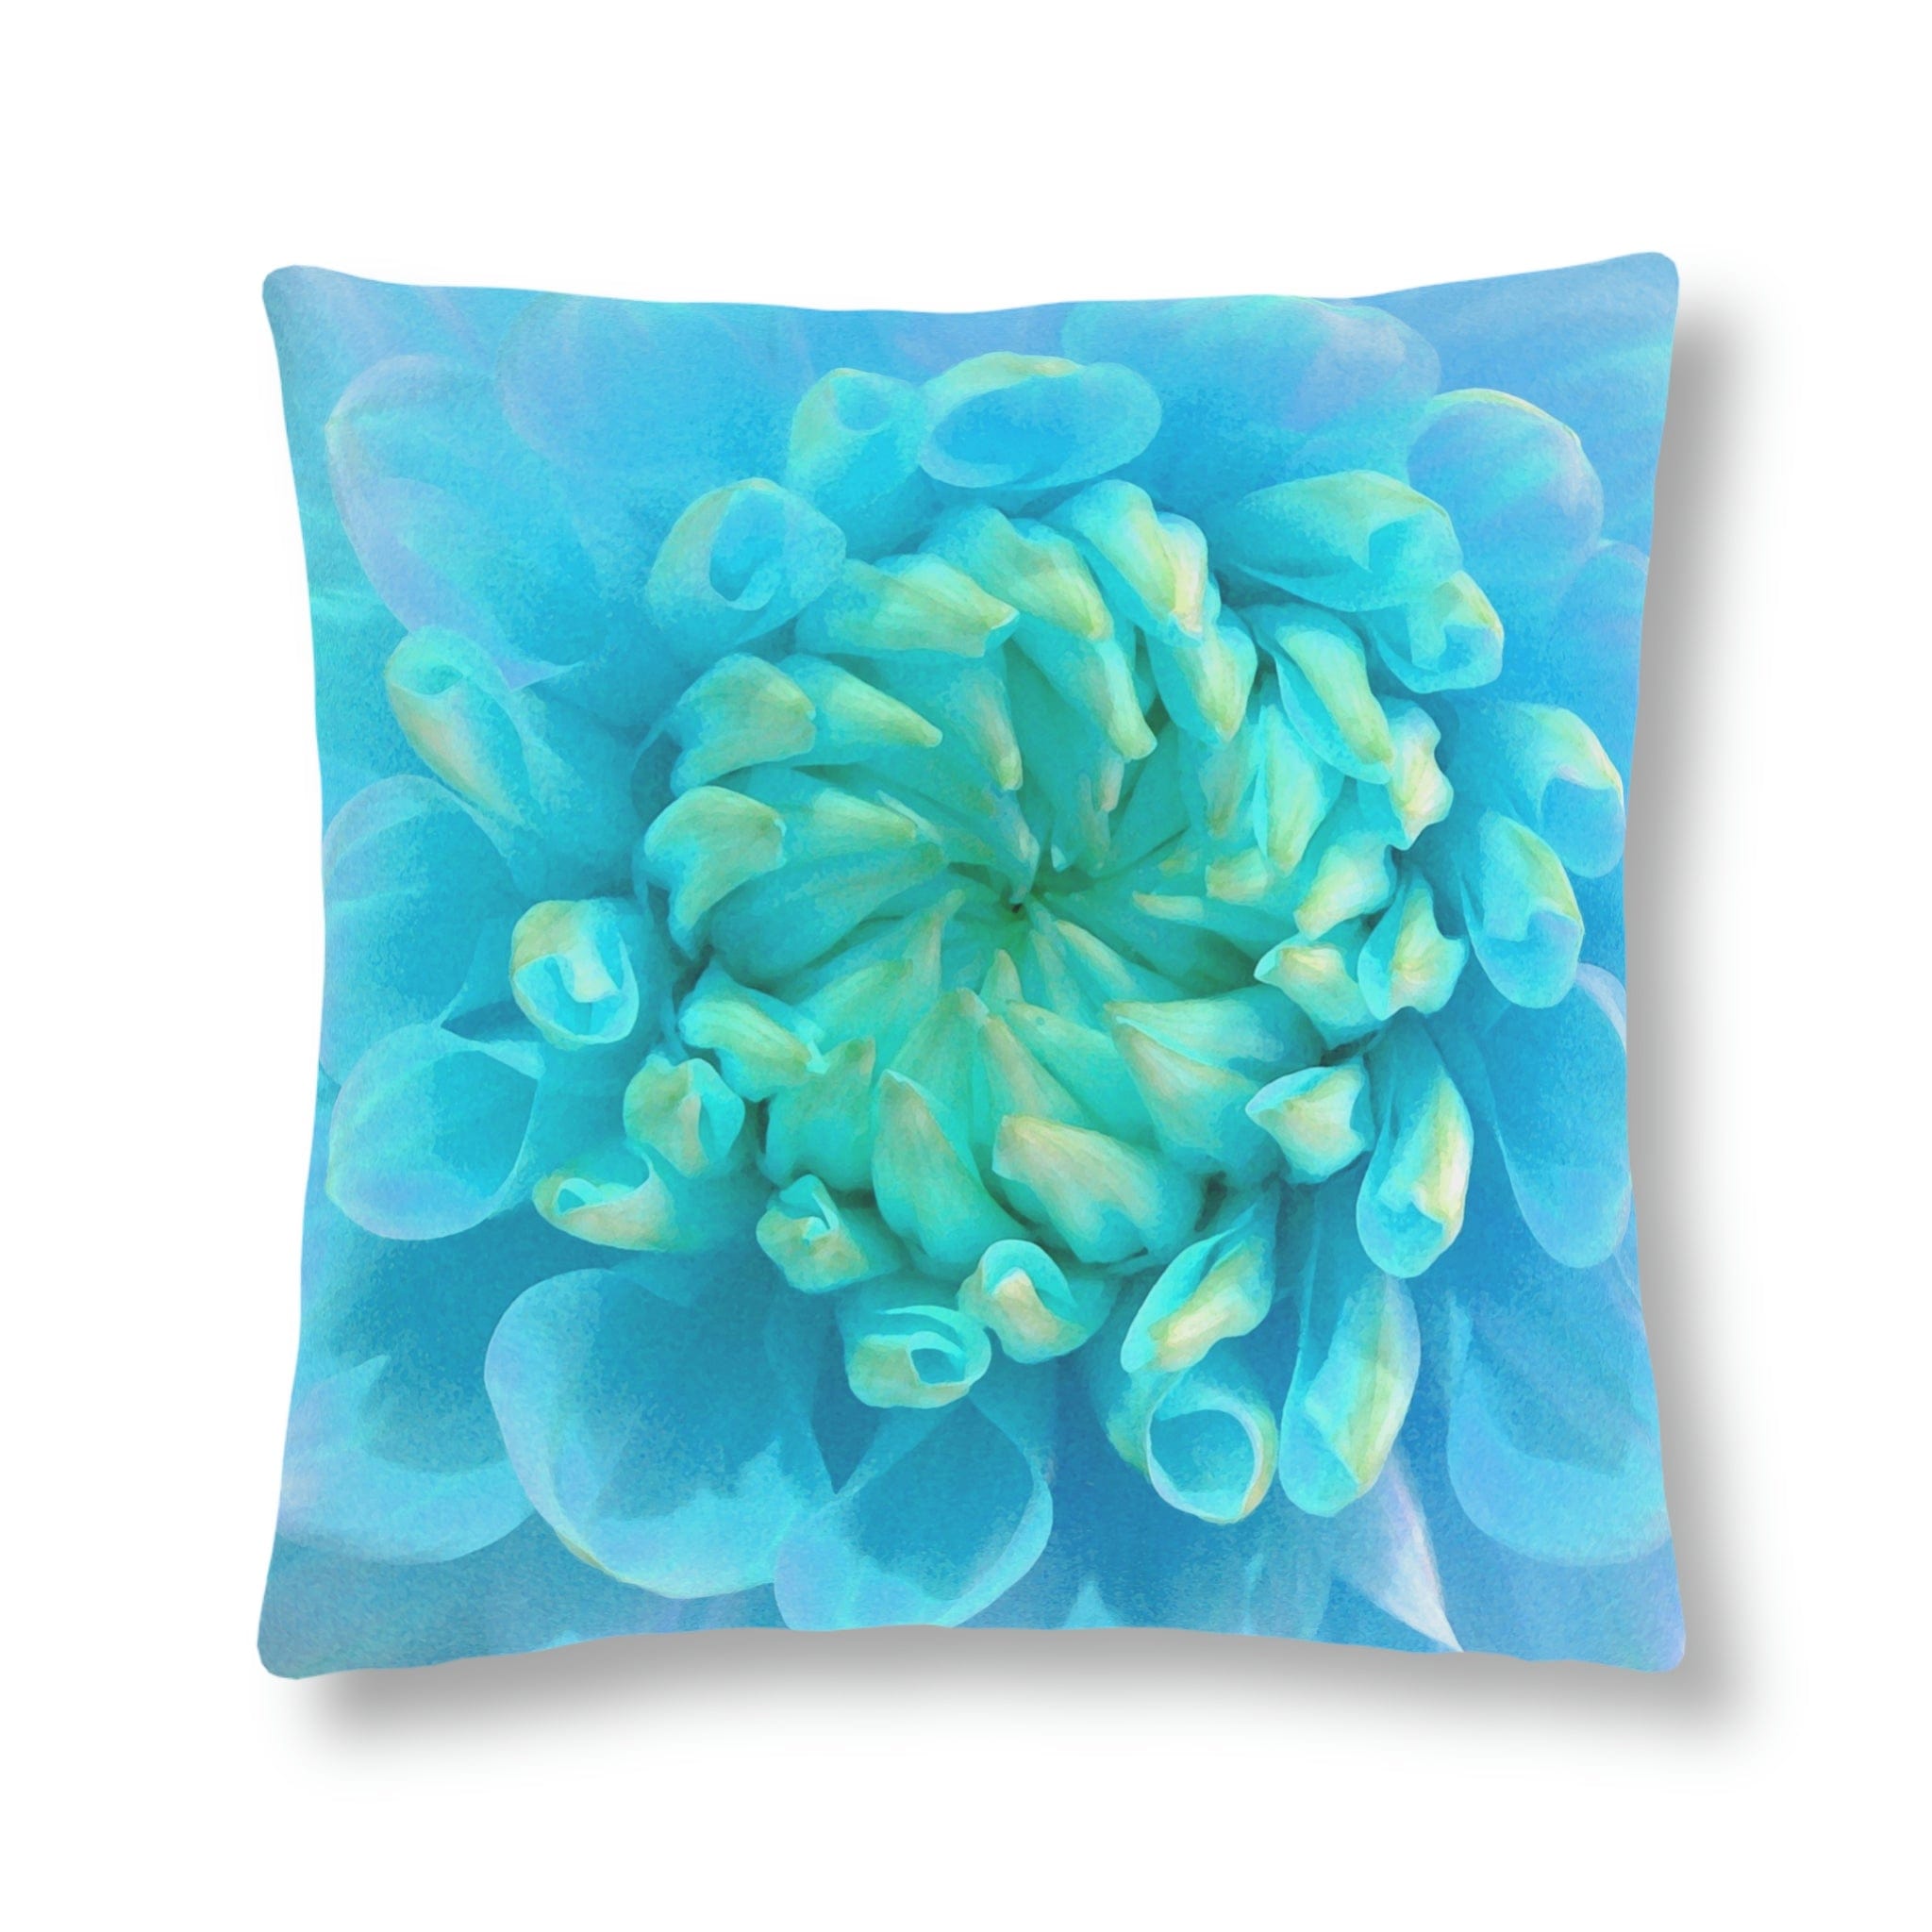 Kate McEnroe New York Outdoor Pillow in Painted Turquoise Dahlia FlowerThrow Pillows21123742034022568419